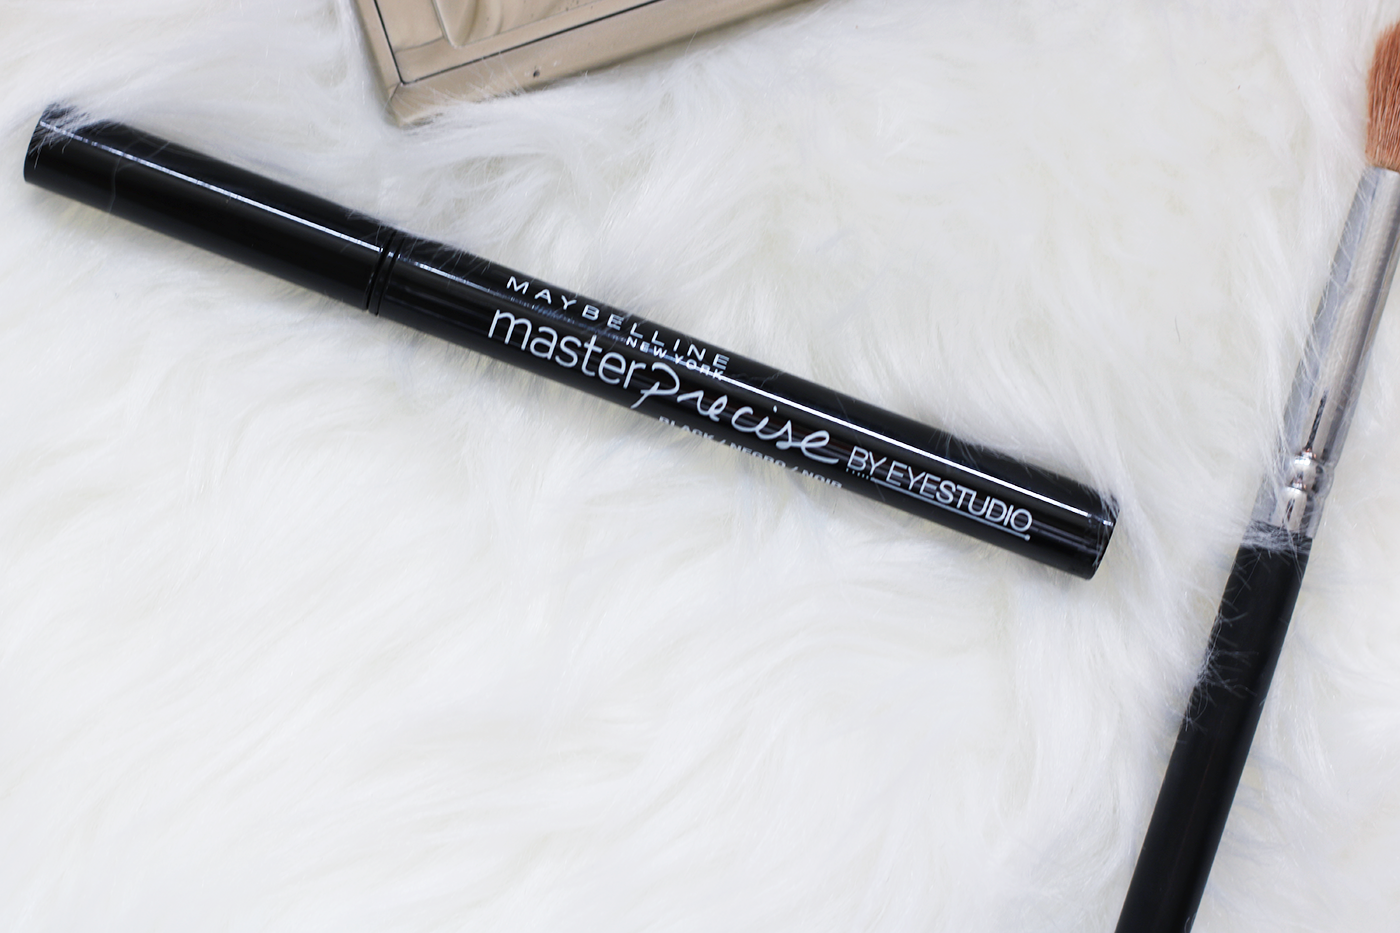 Confession time: I can’t remember a time when I have NEVER not worn drugstore mascara. There is a reason Maybelline is a brand trusted by pros, keep reading….